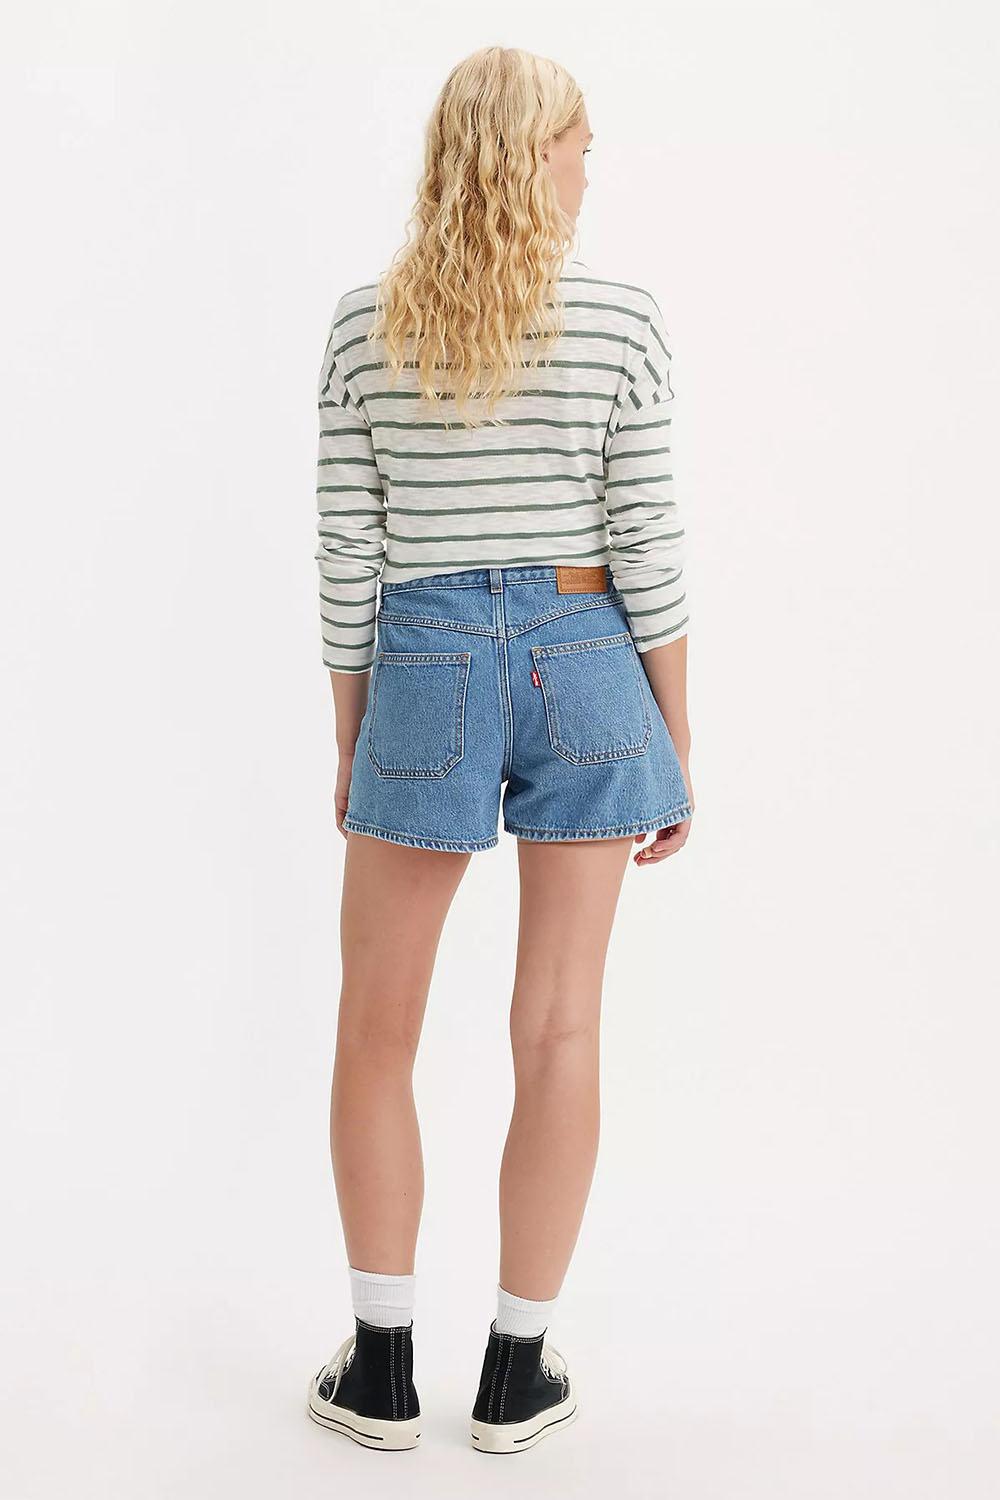 Levis - 80s Mom Short - Patches - Back